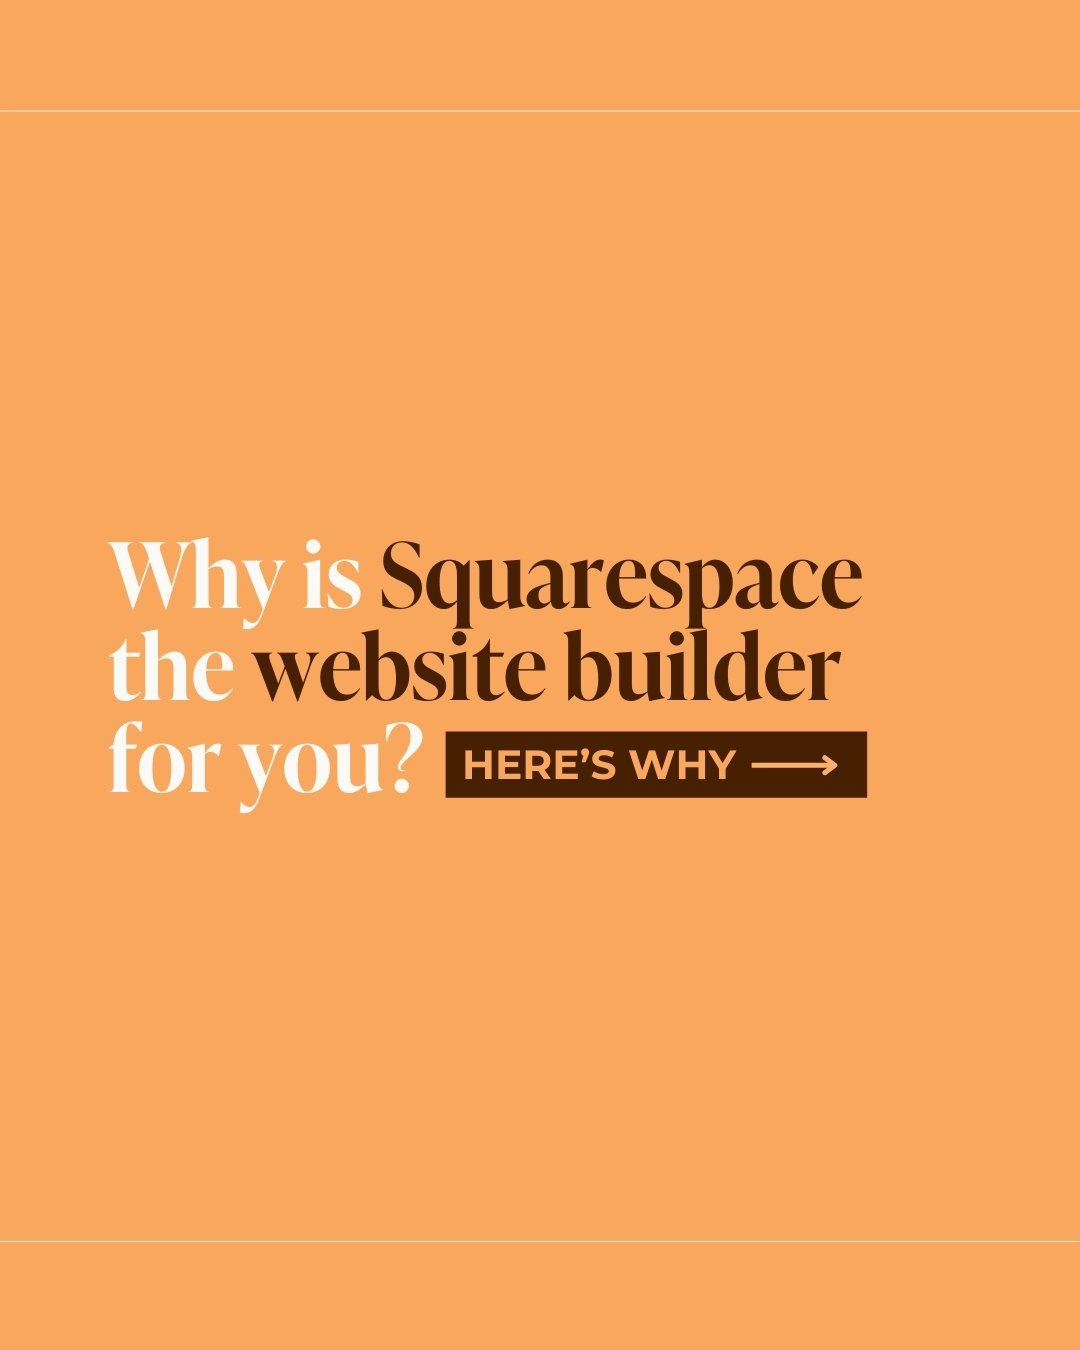 There are SO MANY options, and you want to get it just right!

Are you a busy entrepreneur struggling with:

🤔 Creating a website without having to code?
🤔 Tech troubles and need to hire a team of IT specialists just to maintain it?
🤔 Selling prod